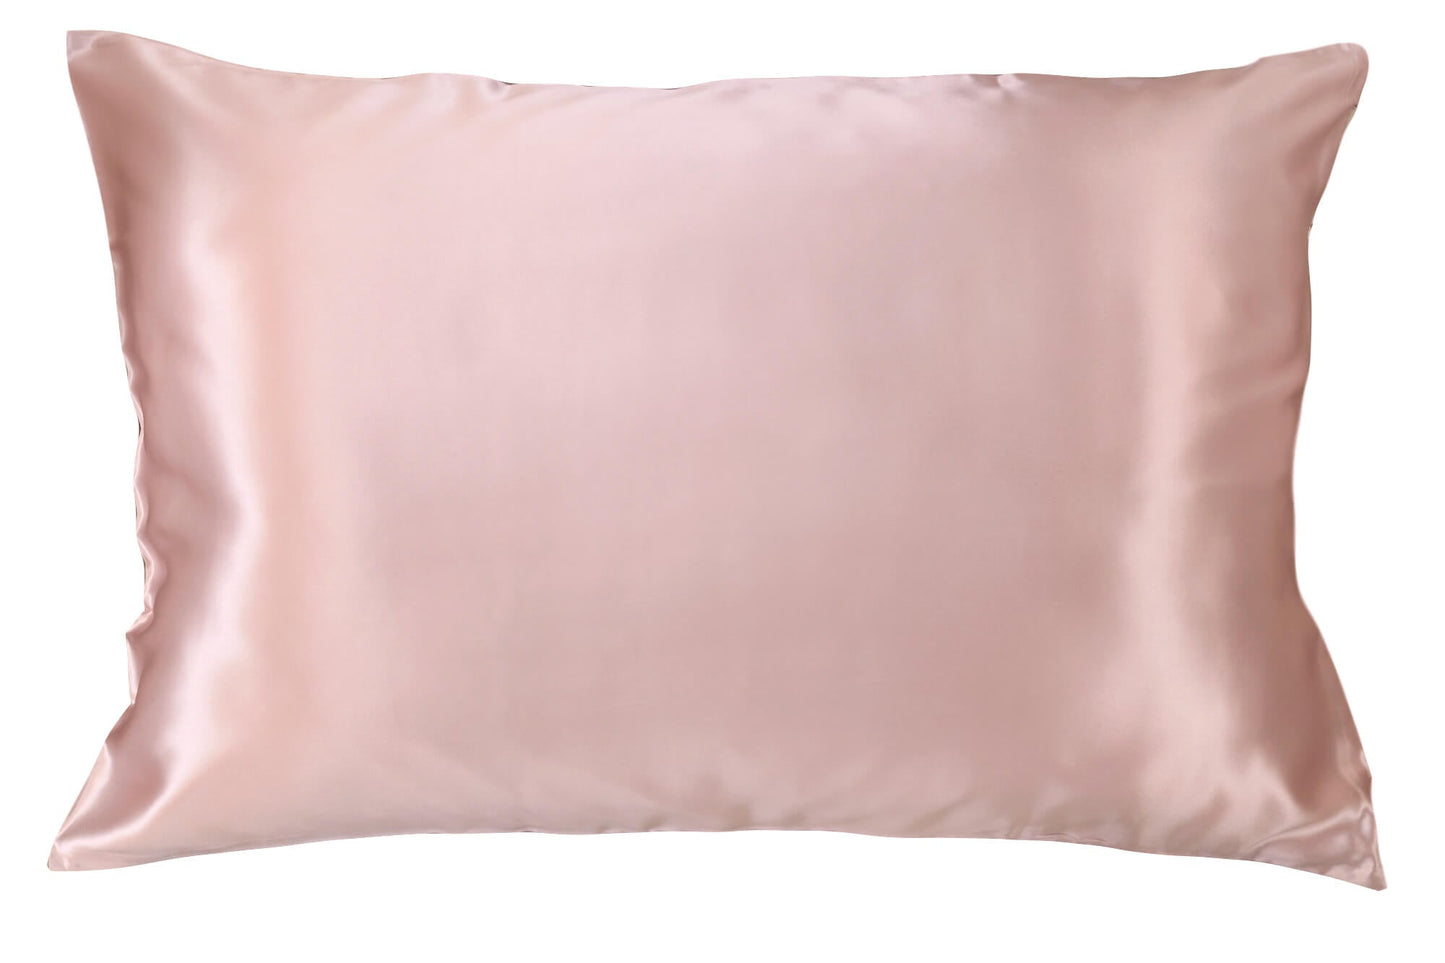 25 Momme Silk Pillowcase - King Vintage Pink Zipper Closure - Outlet